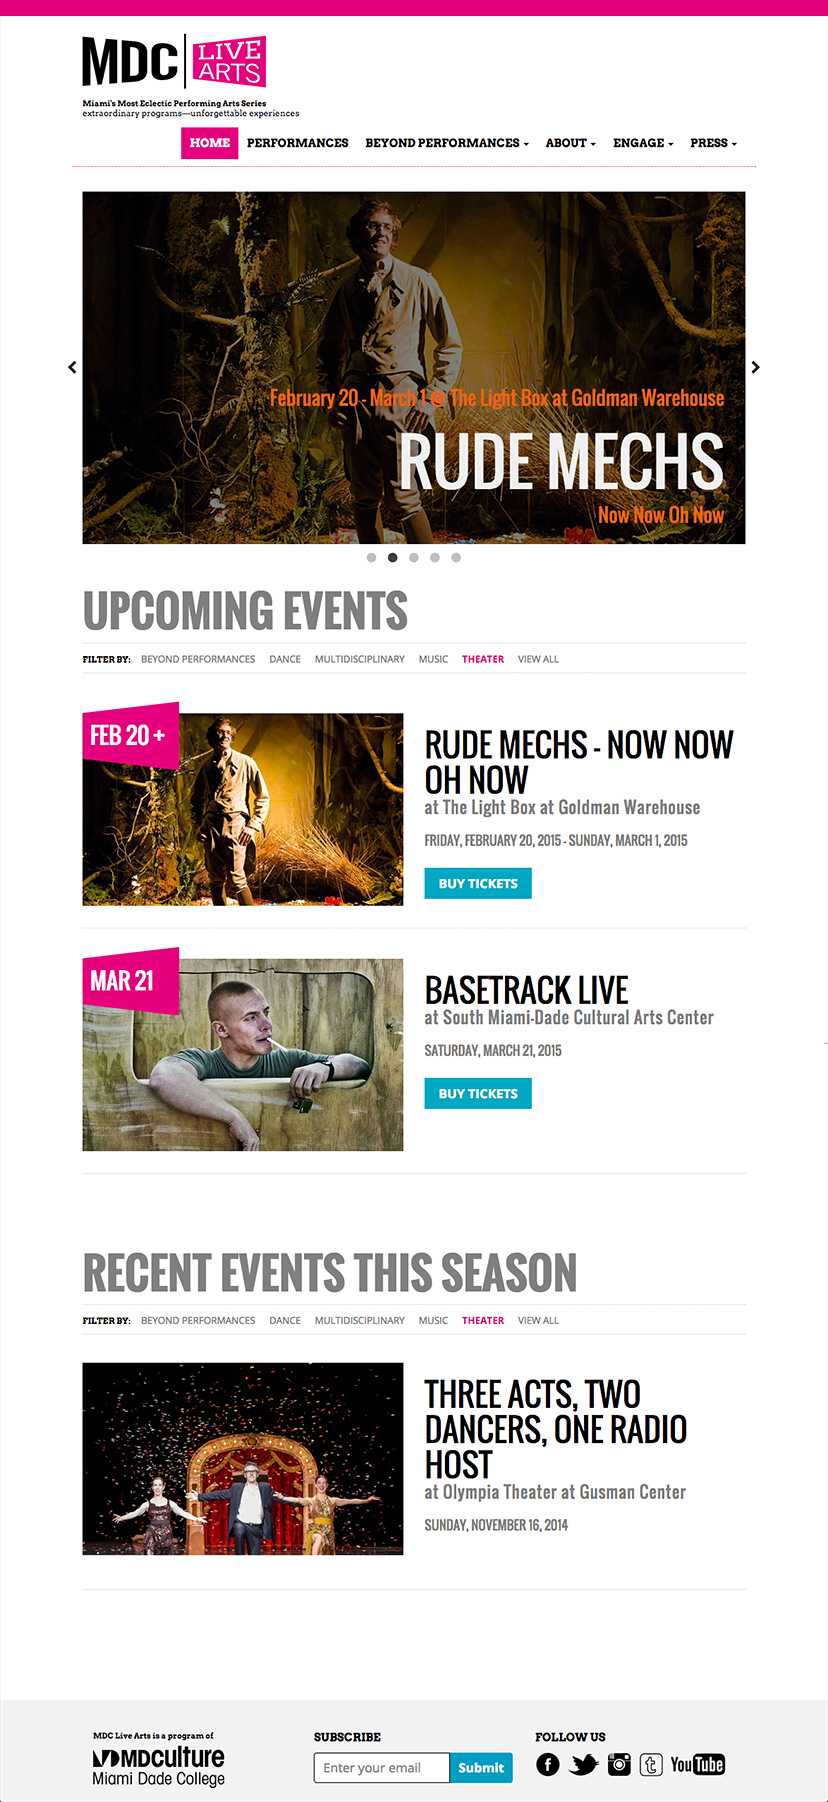 Screenshot of the home page on MDC Live Arts' website